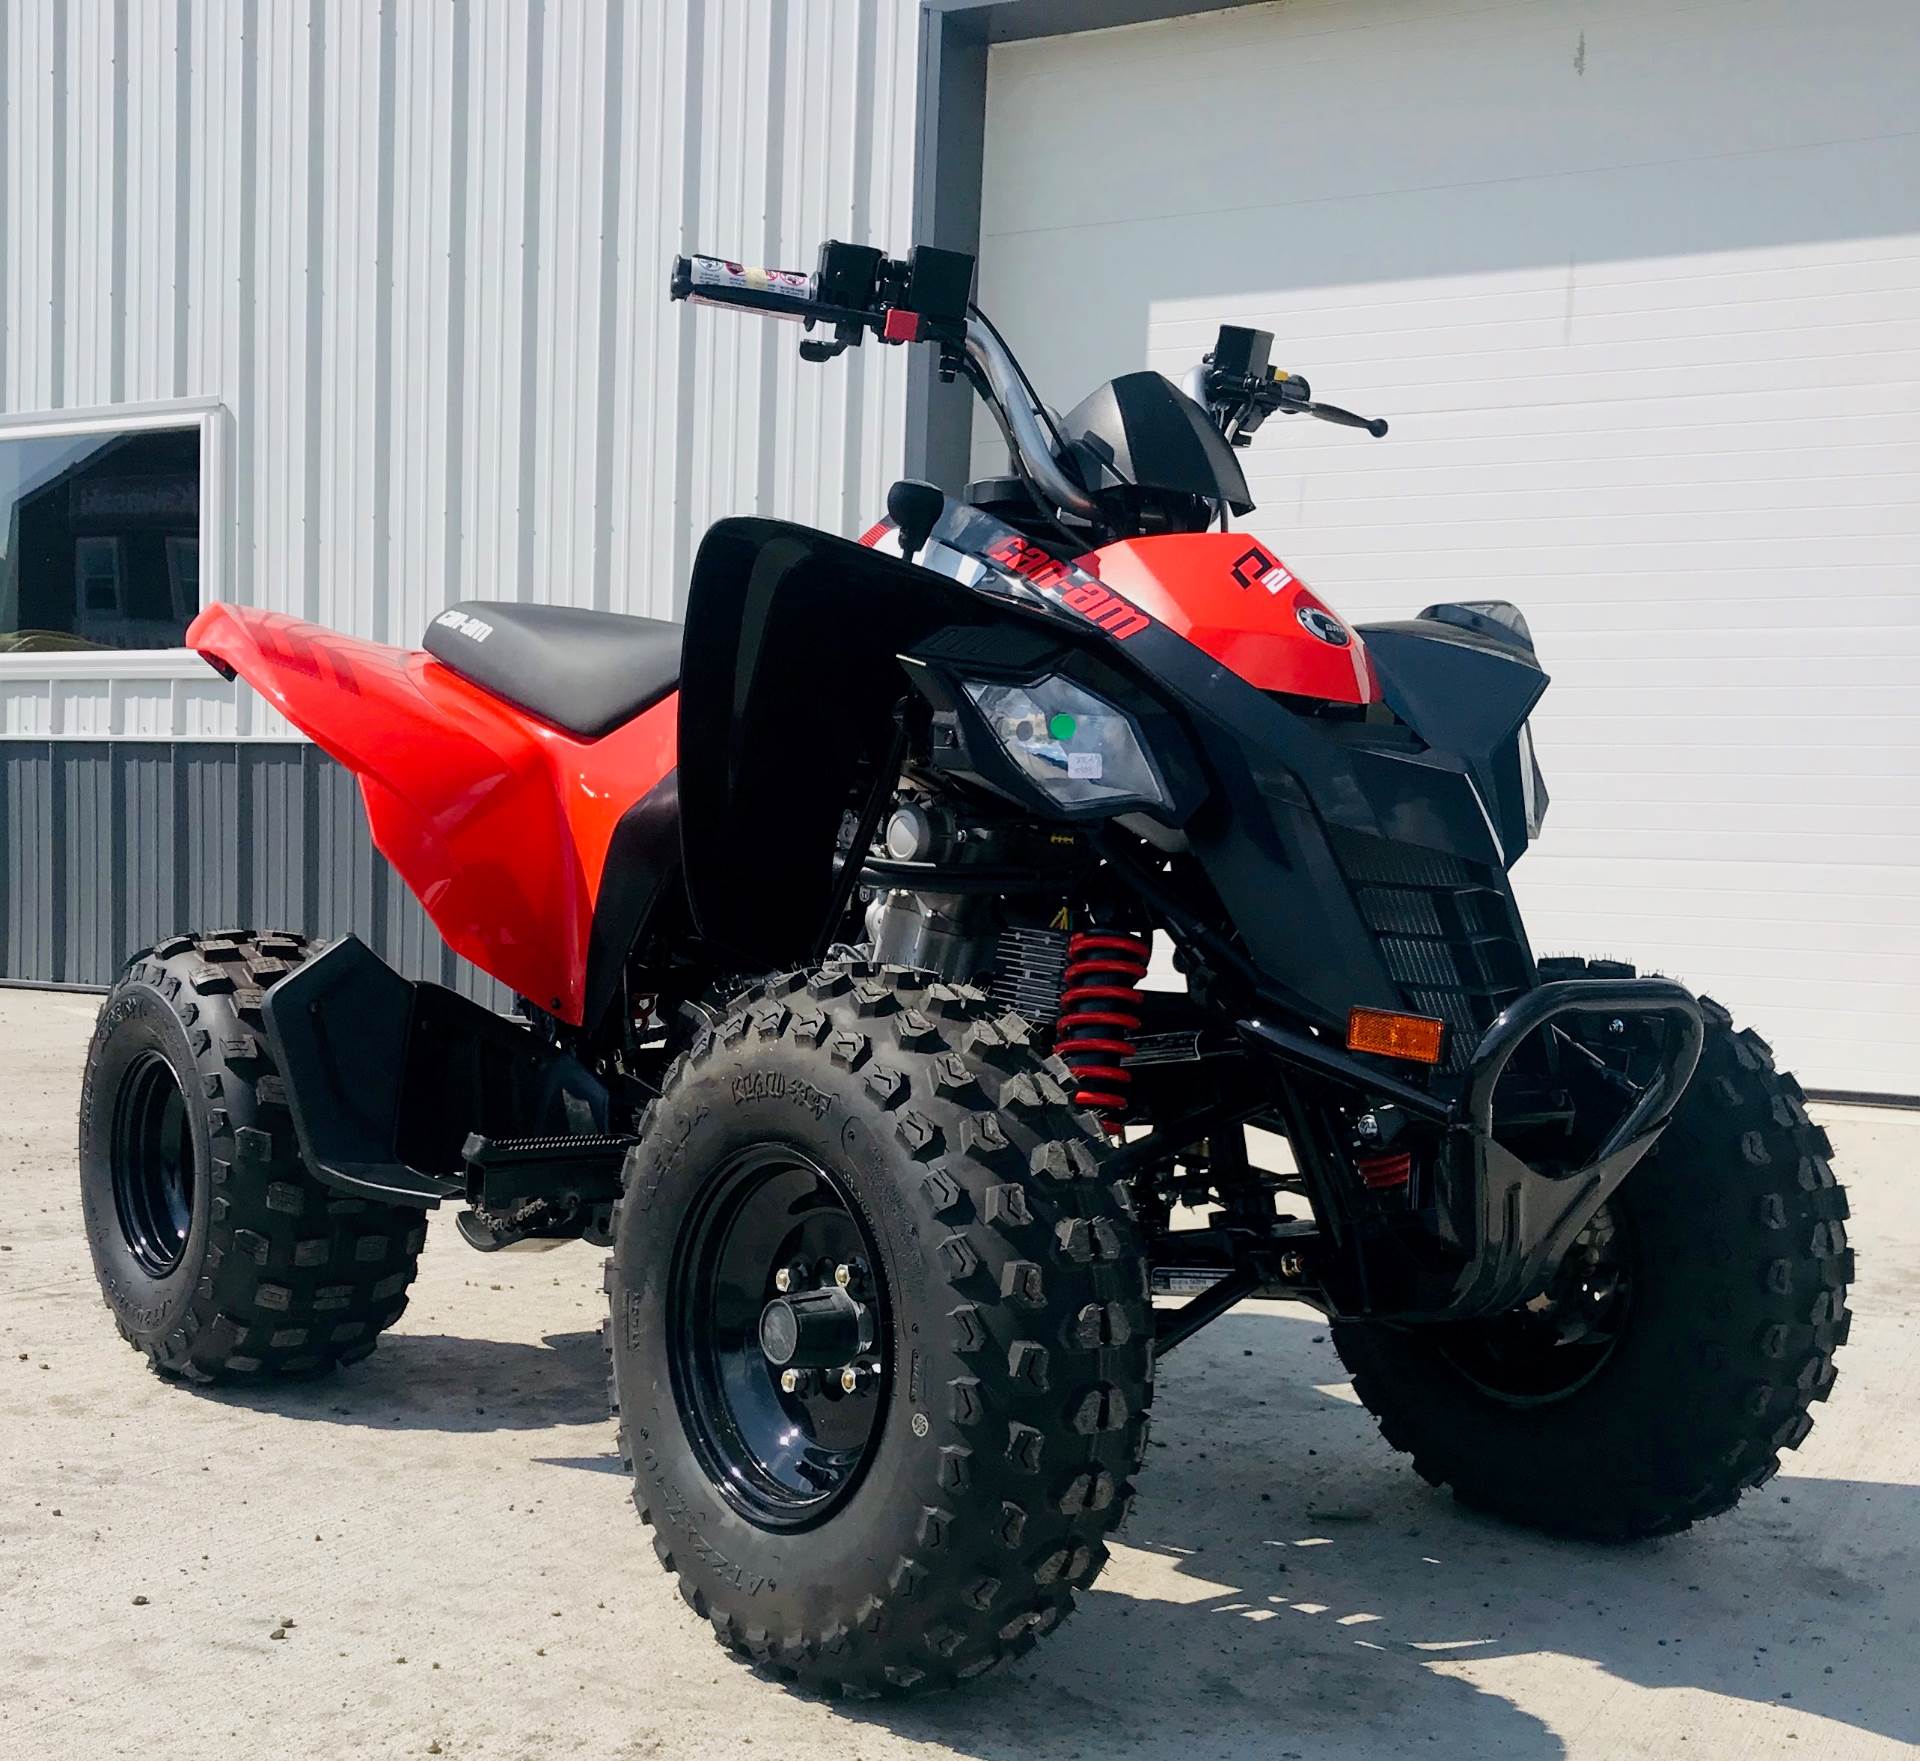 2020 CanAm™ DS 250 For Sale Cambridge, OH 171325